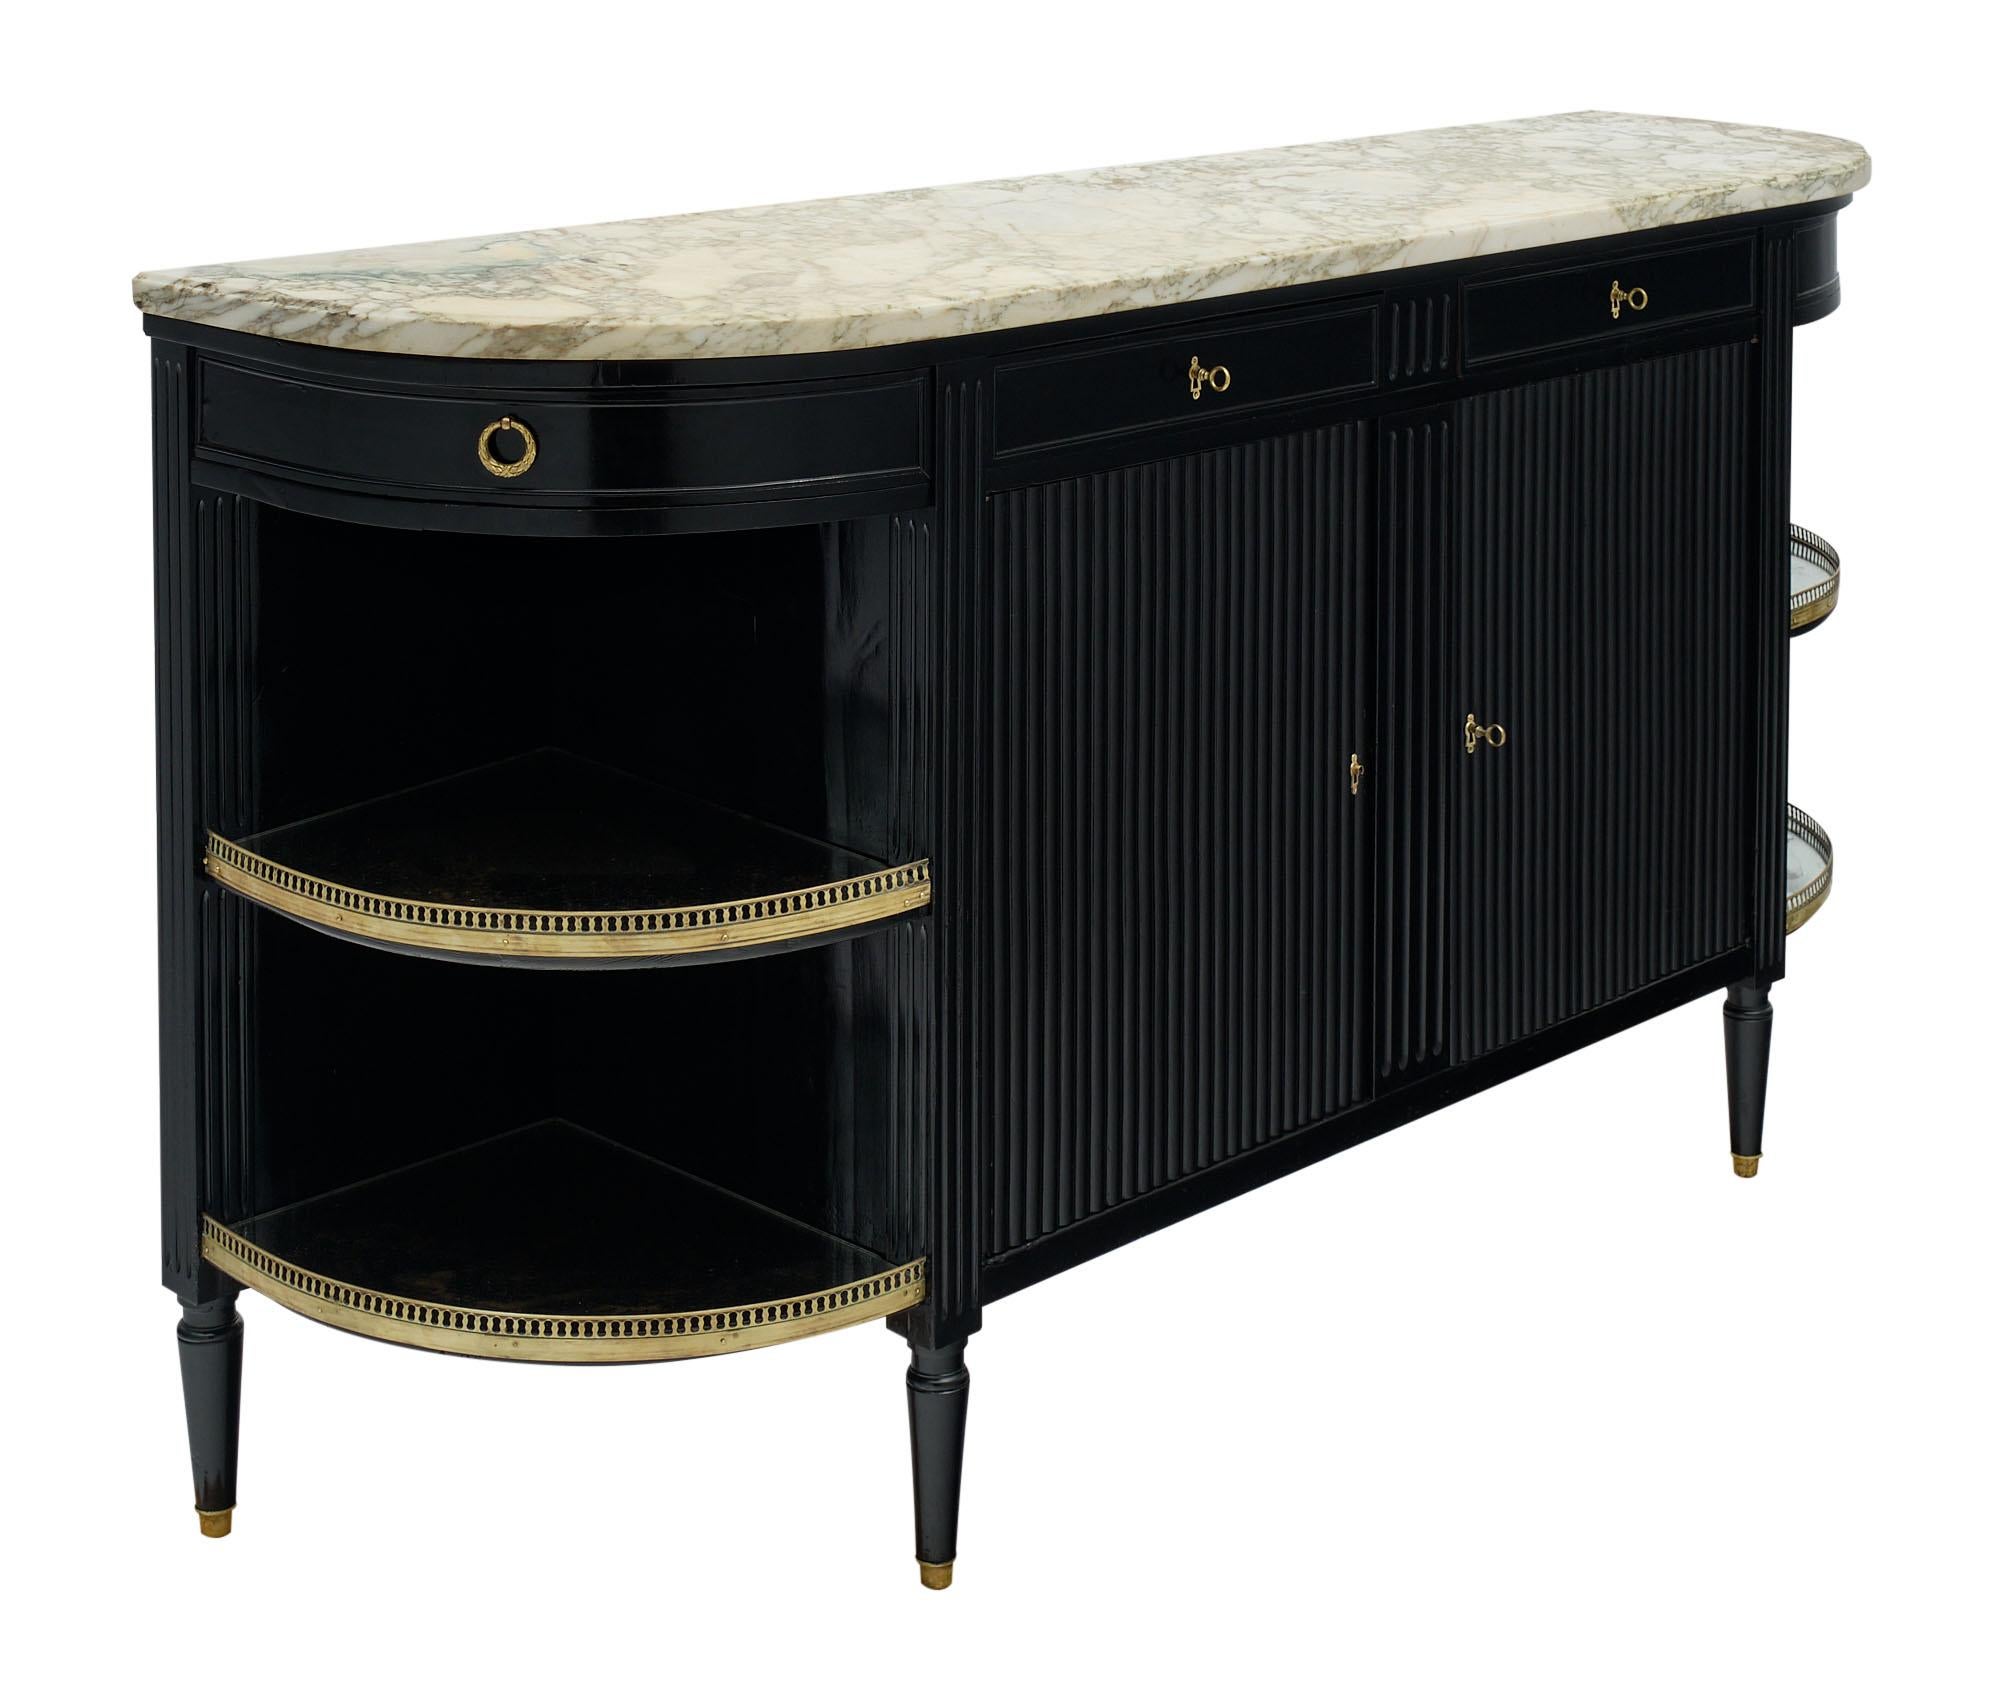 Buffet /enfilade in the French Louis XVI style made of mahogany that has been ebonized with a museum-quality French polish for luster. An intact Carrara marble top is original to the piece. Open corner shelving is veneered with antiqued mirror. Four